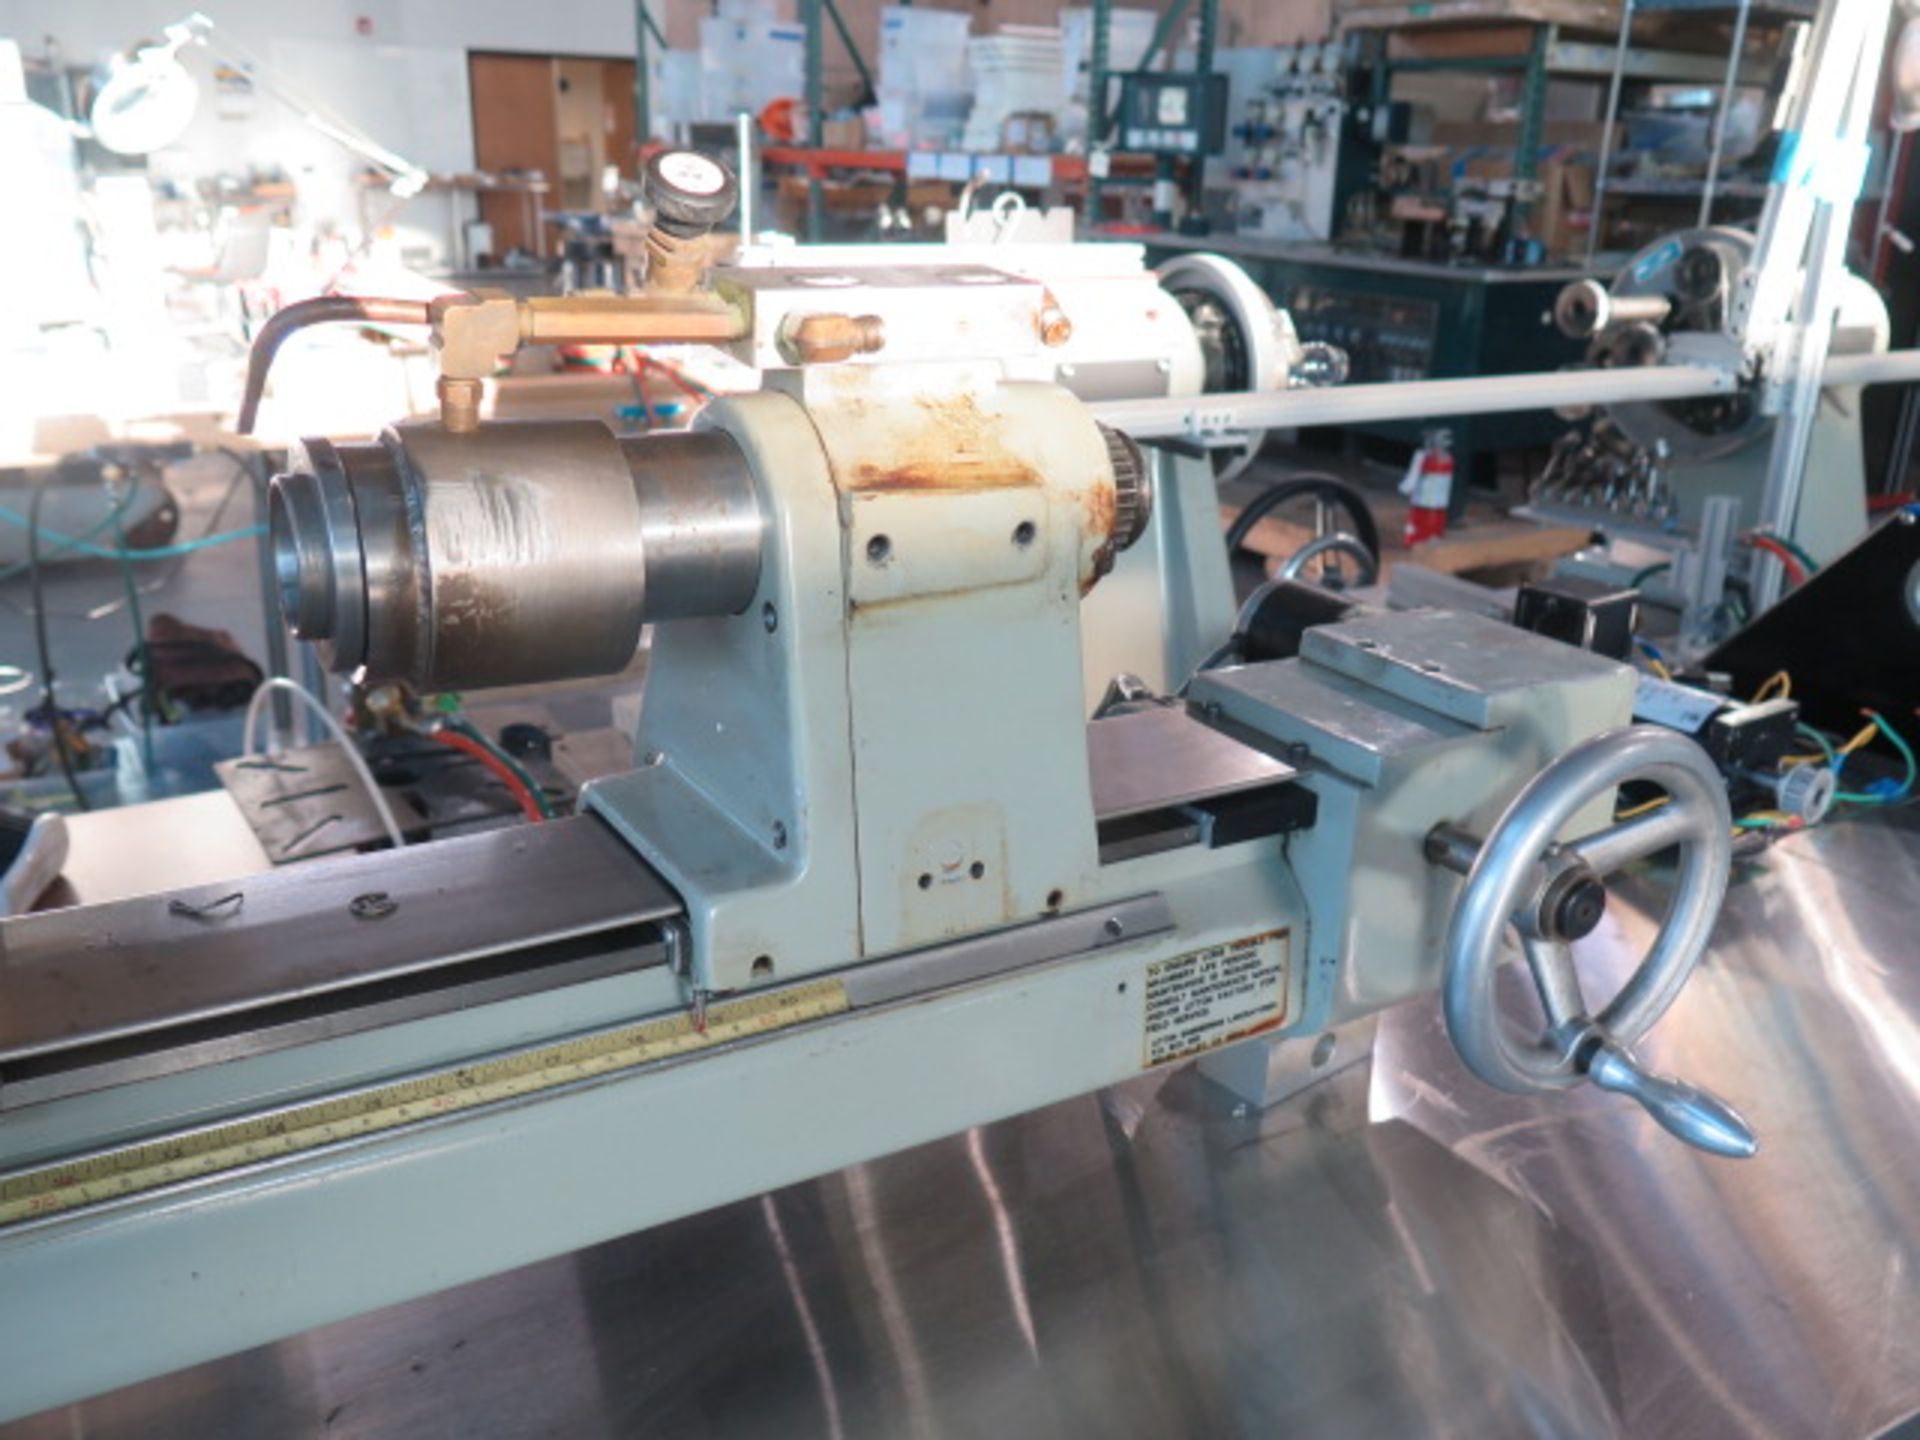 2000 Litton mmdl. F053 8” x 12” Glass Lathe s/n 1543R w/ Variable Speed Drive, 5C Colleted Heads, - Image 2 of 7